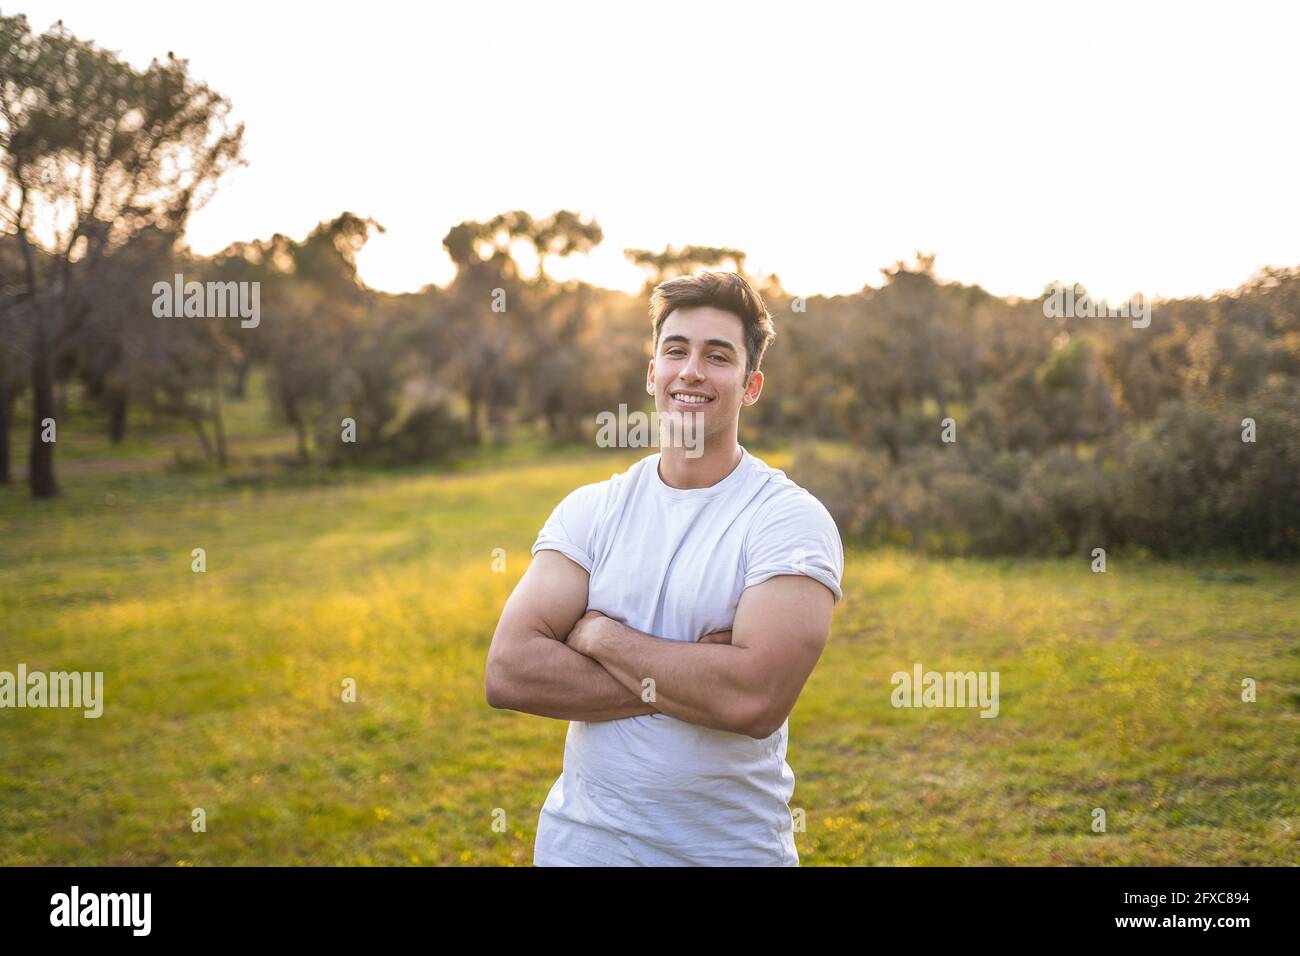 Handsome sports person standing with arms crossed during sunset Stock Photo